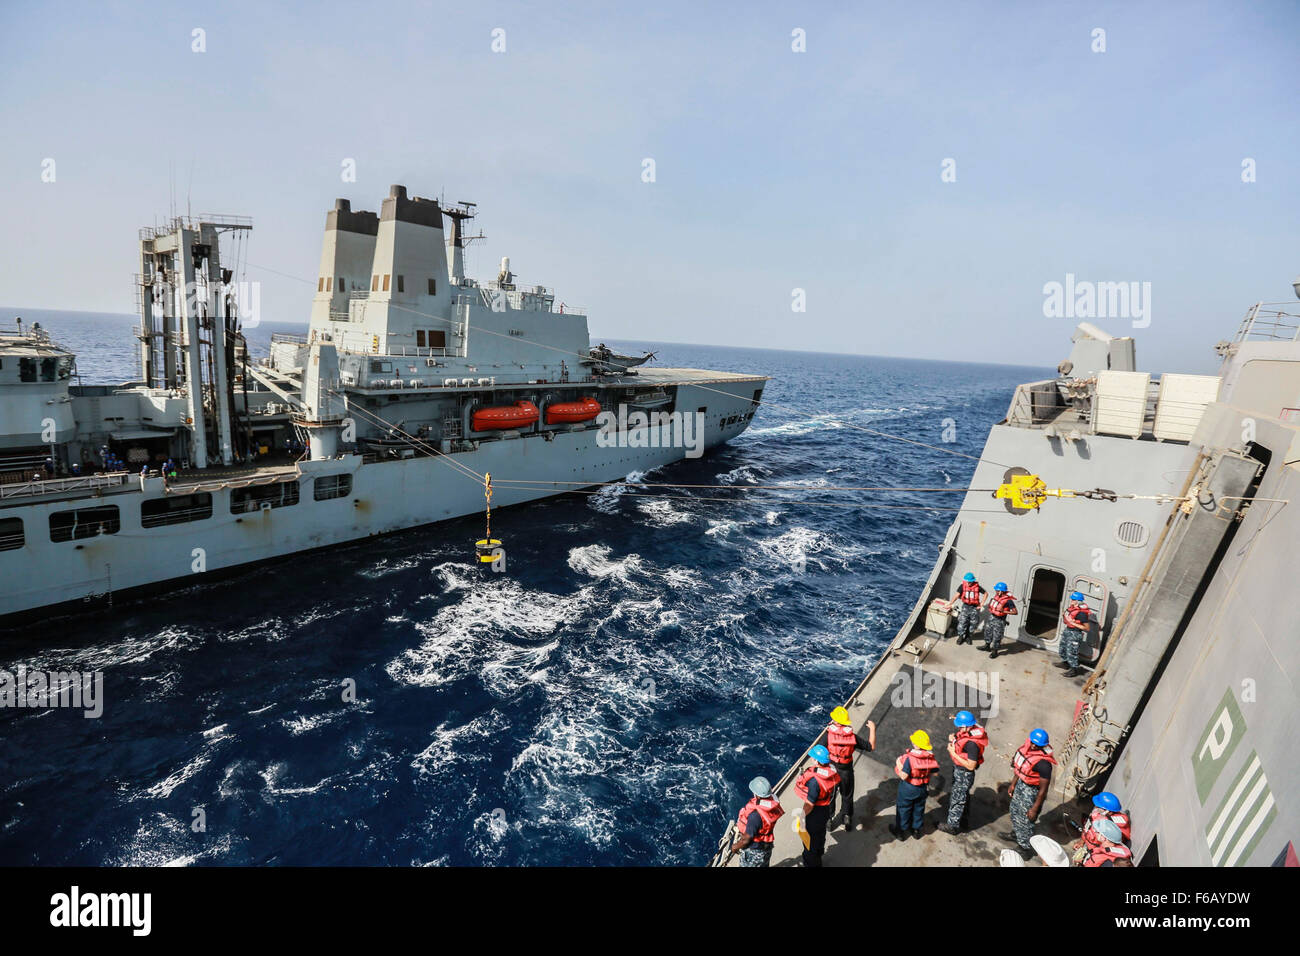 GULF OF ADEN (Aug. 20, 2015) The RFA Fort Victoria (A387) delivers a 2 ton test weight before it begins to deliver goods to the amphibious transport dock ship USS Anchorage (LPD 23) during a replenishment-at-sea. Elements of the 15th Marine Expeditionary Unit are embarked aboard the Anchorage, which is part of the Essex Amphibious Ready Group, and are deployed in support of maritime security operations and theater security cooperation efforts in the U.S. 5th Fleet area of operations.  (U.S. Marine Corps photo by Sgt. Steve H. Lopez/  Released) Stock Photo